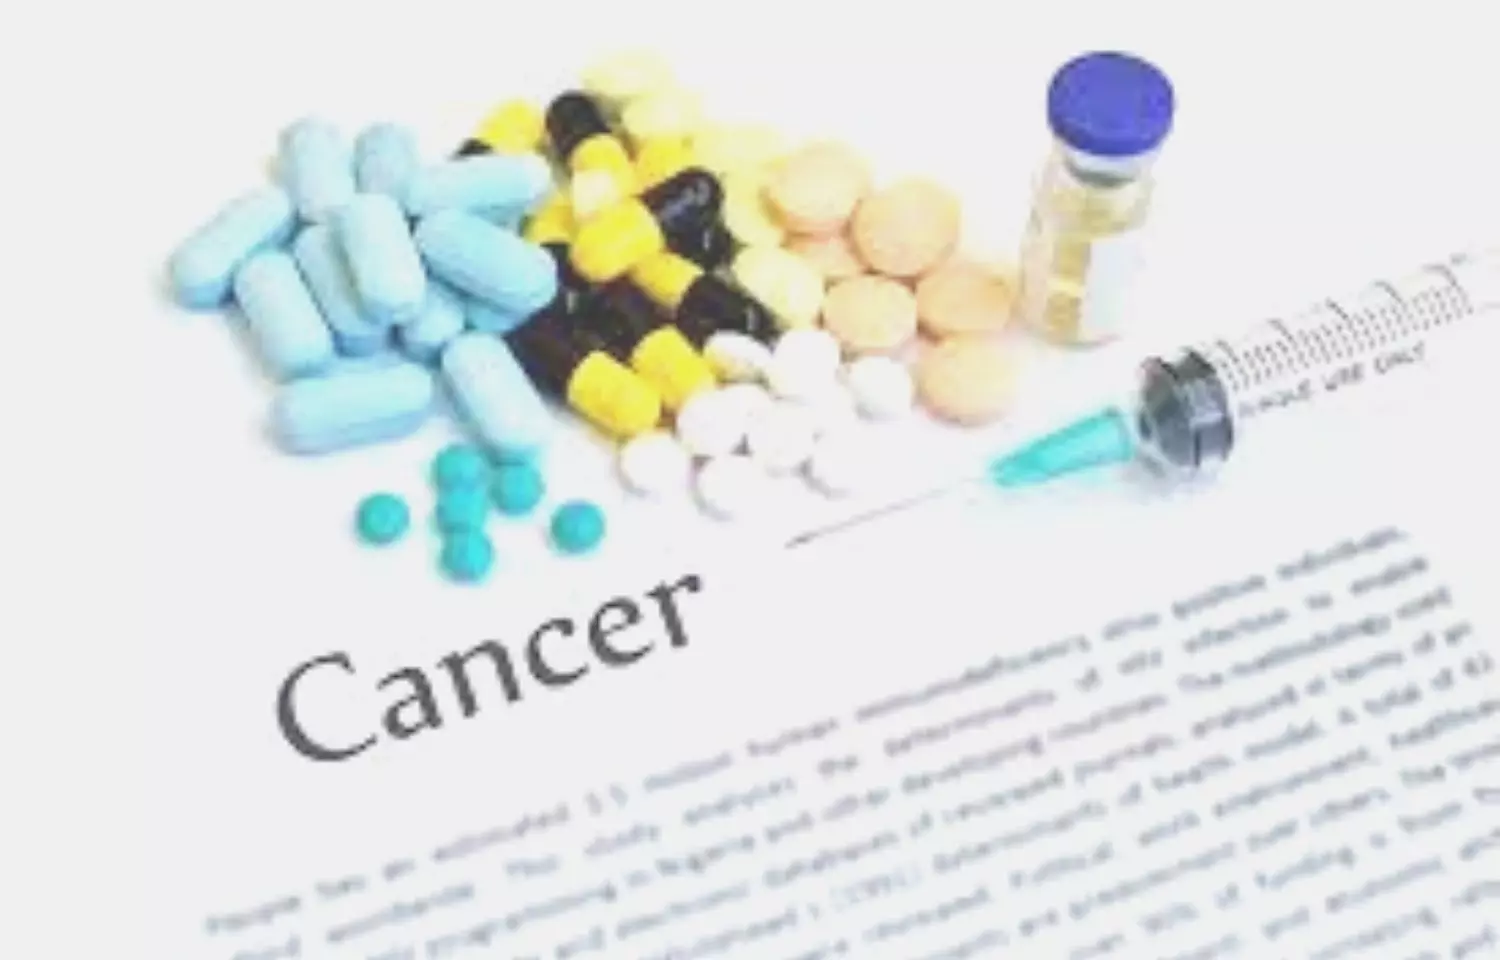 Not many newly approved cancer drugs replace existing standard-of-care therapies: JAMA